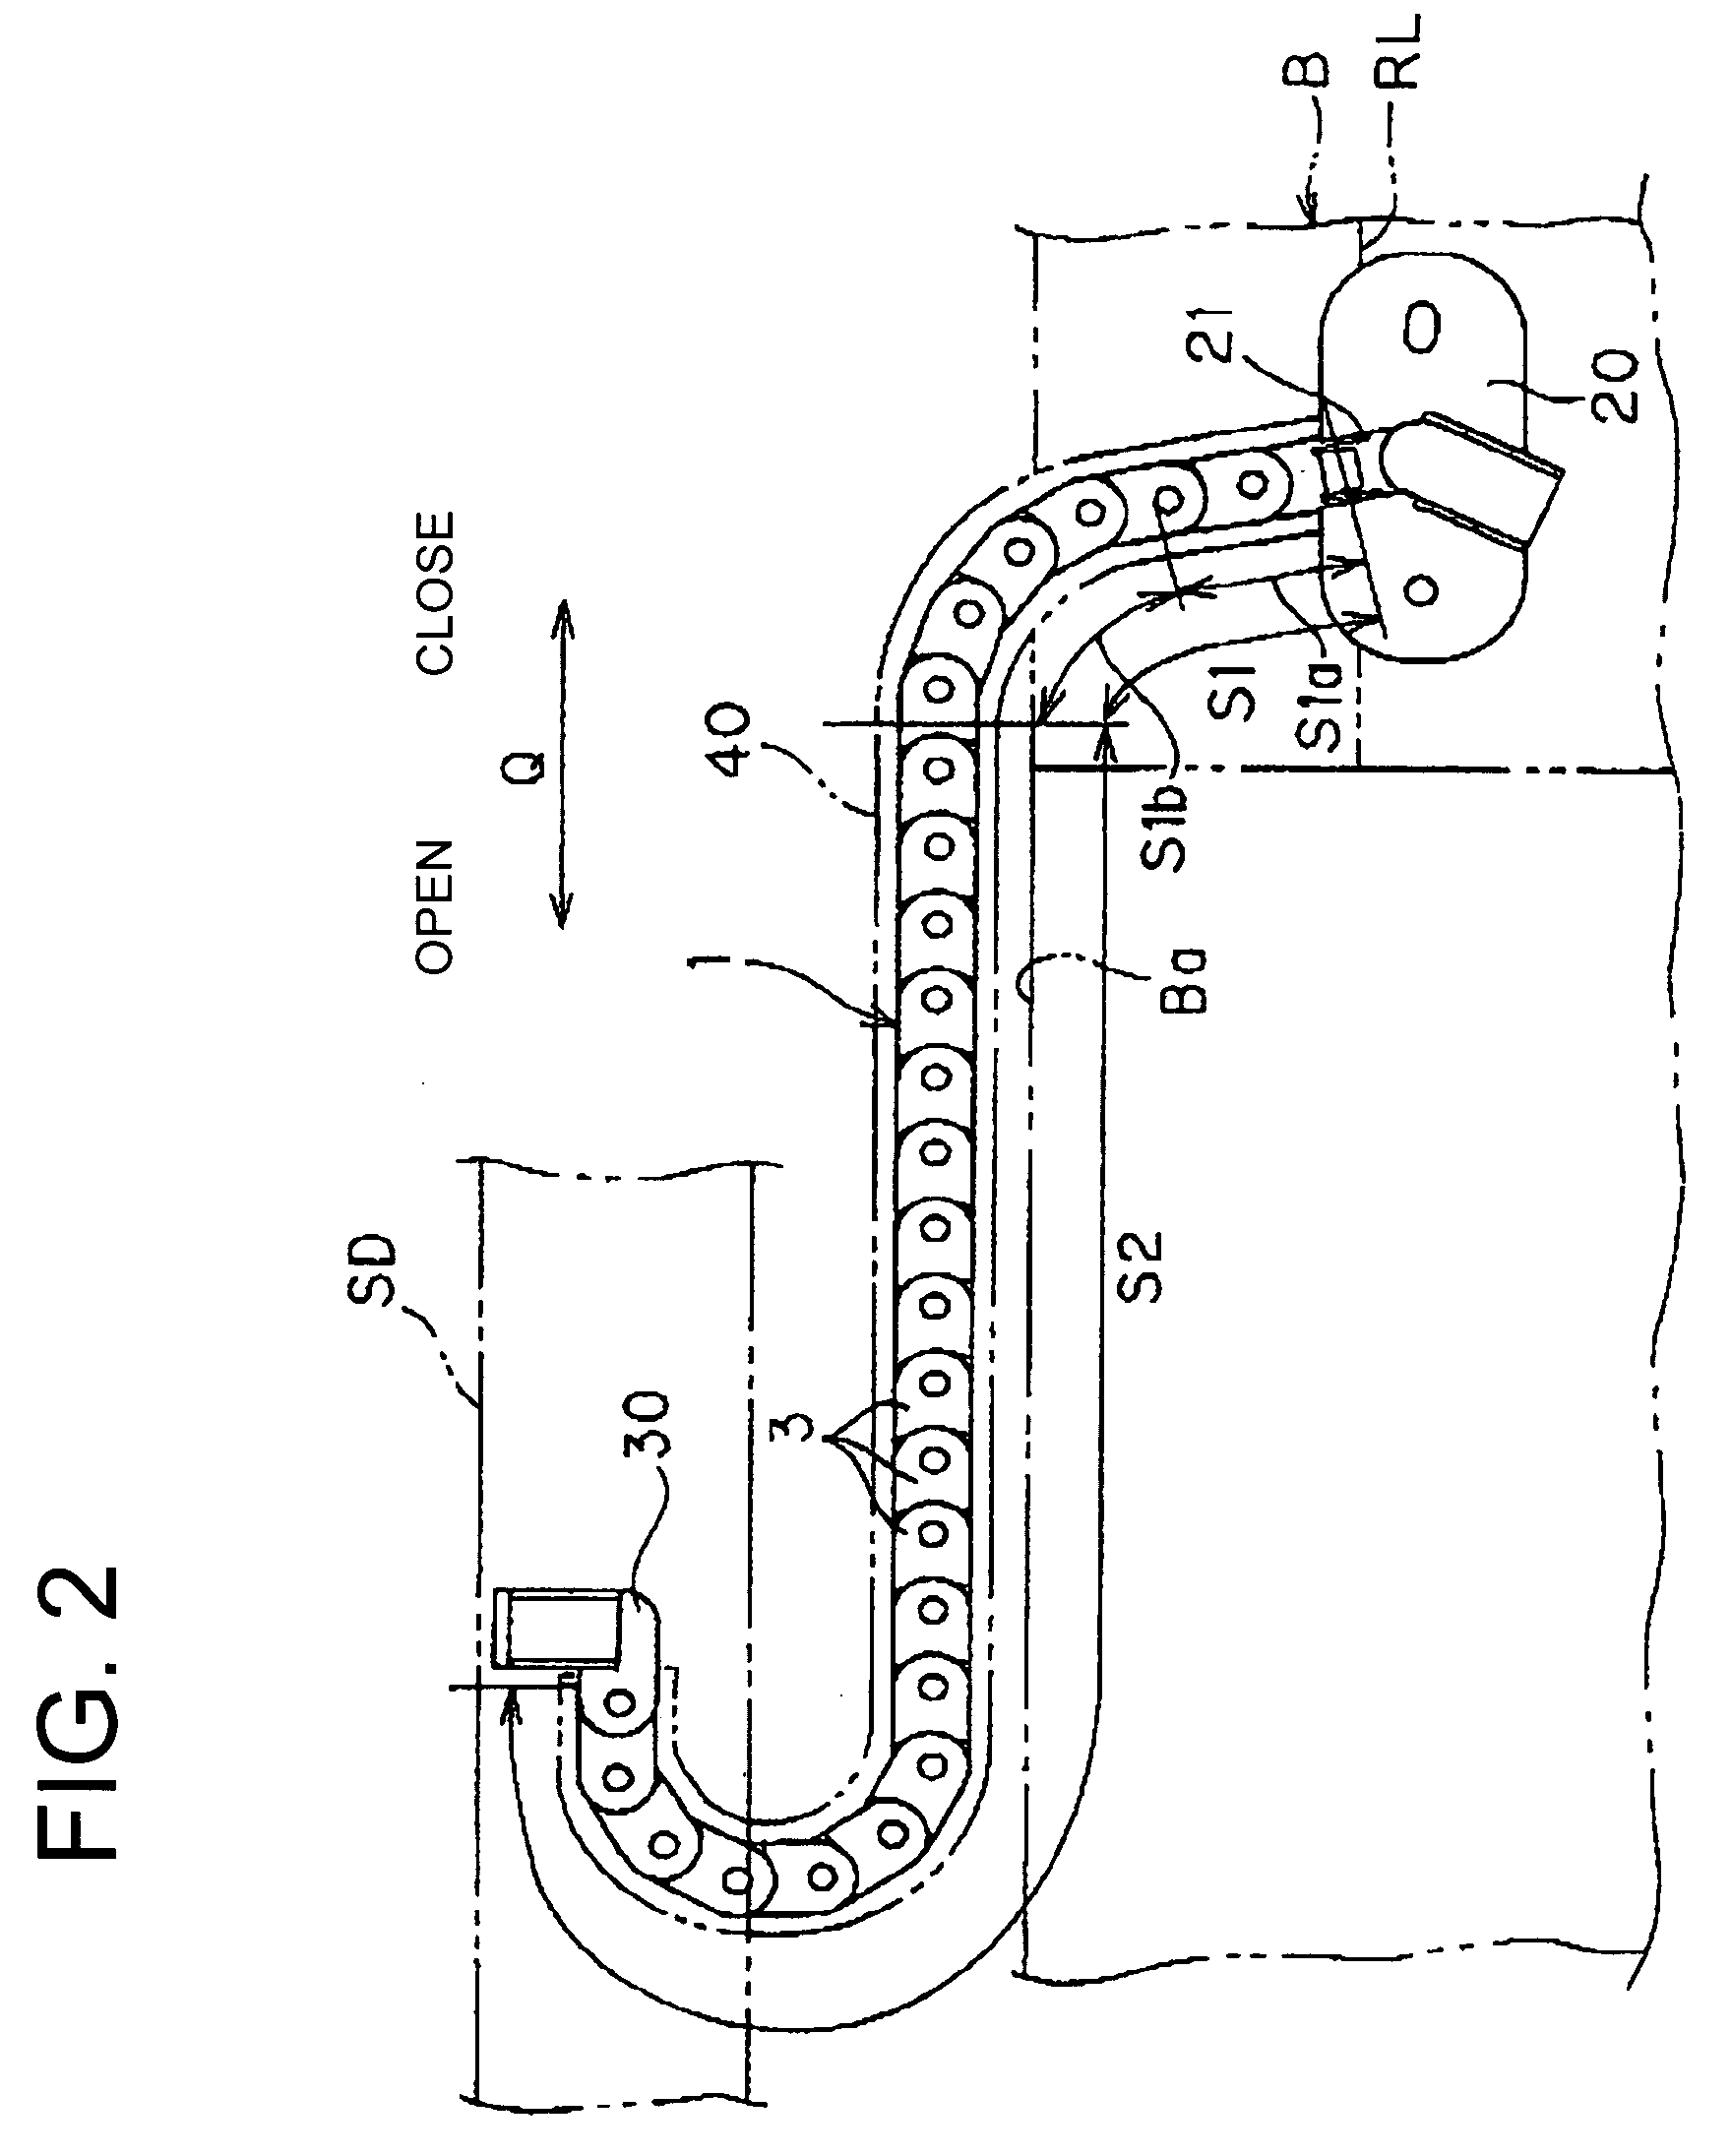 Cable guide and power supply apparatus for a vehicle slide door